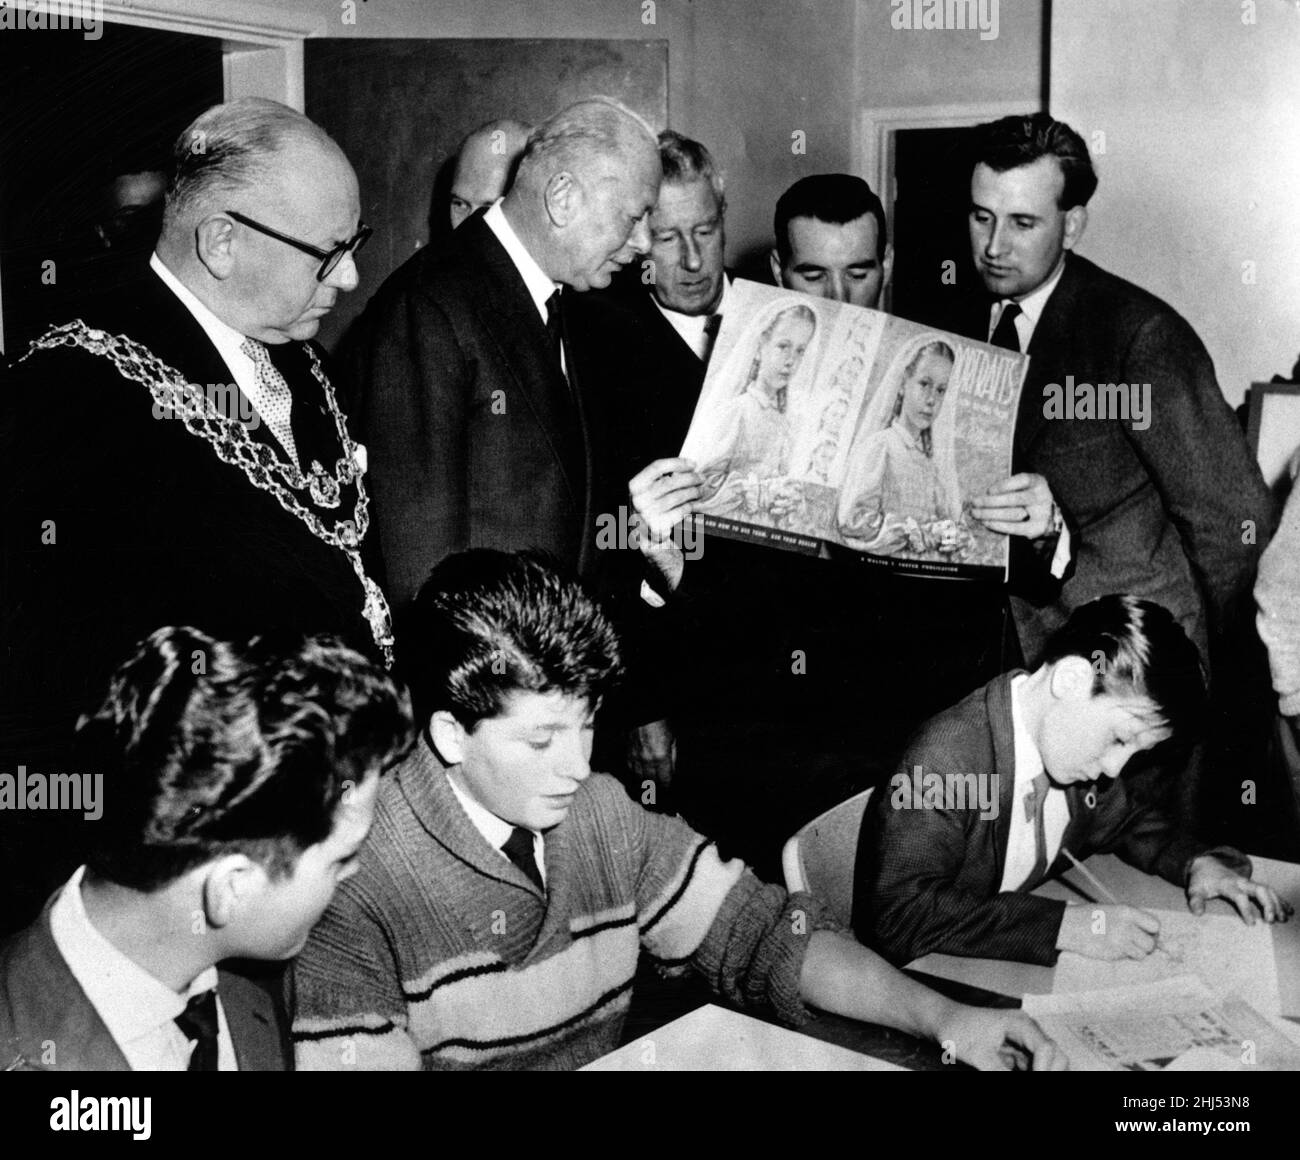 Prince Henry, Duke of Gloucester, at the official opening of Shard End Youth Club with Lord Mayor, Coun Eric Edward Mole (far left). 1961. Stock Photo